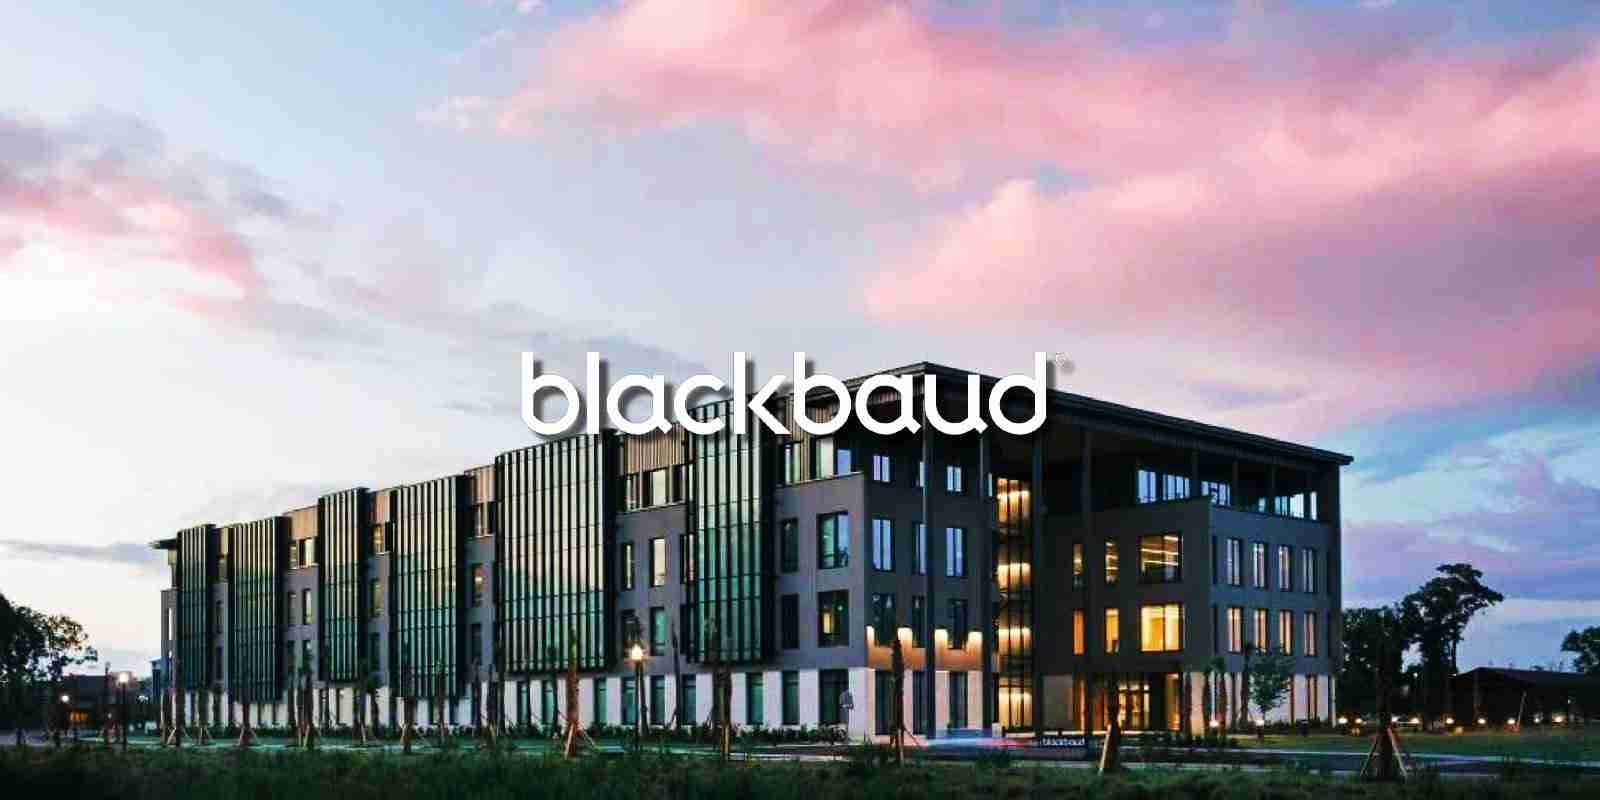 blackbaud-sued-in-23-class-action-lawsuits-after-ransomware-attack